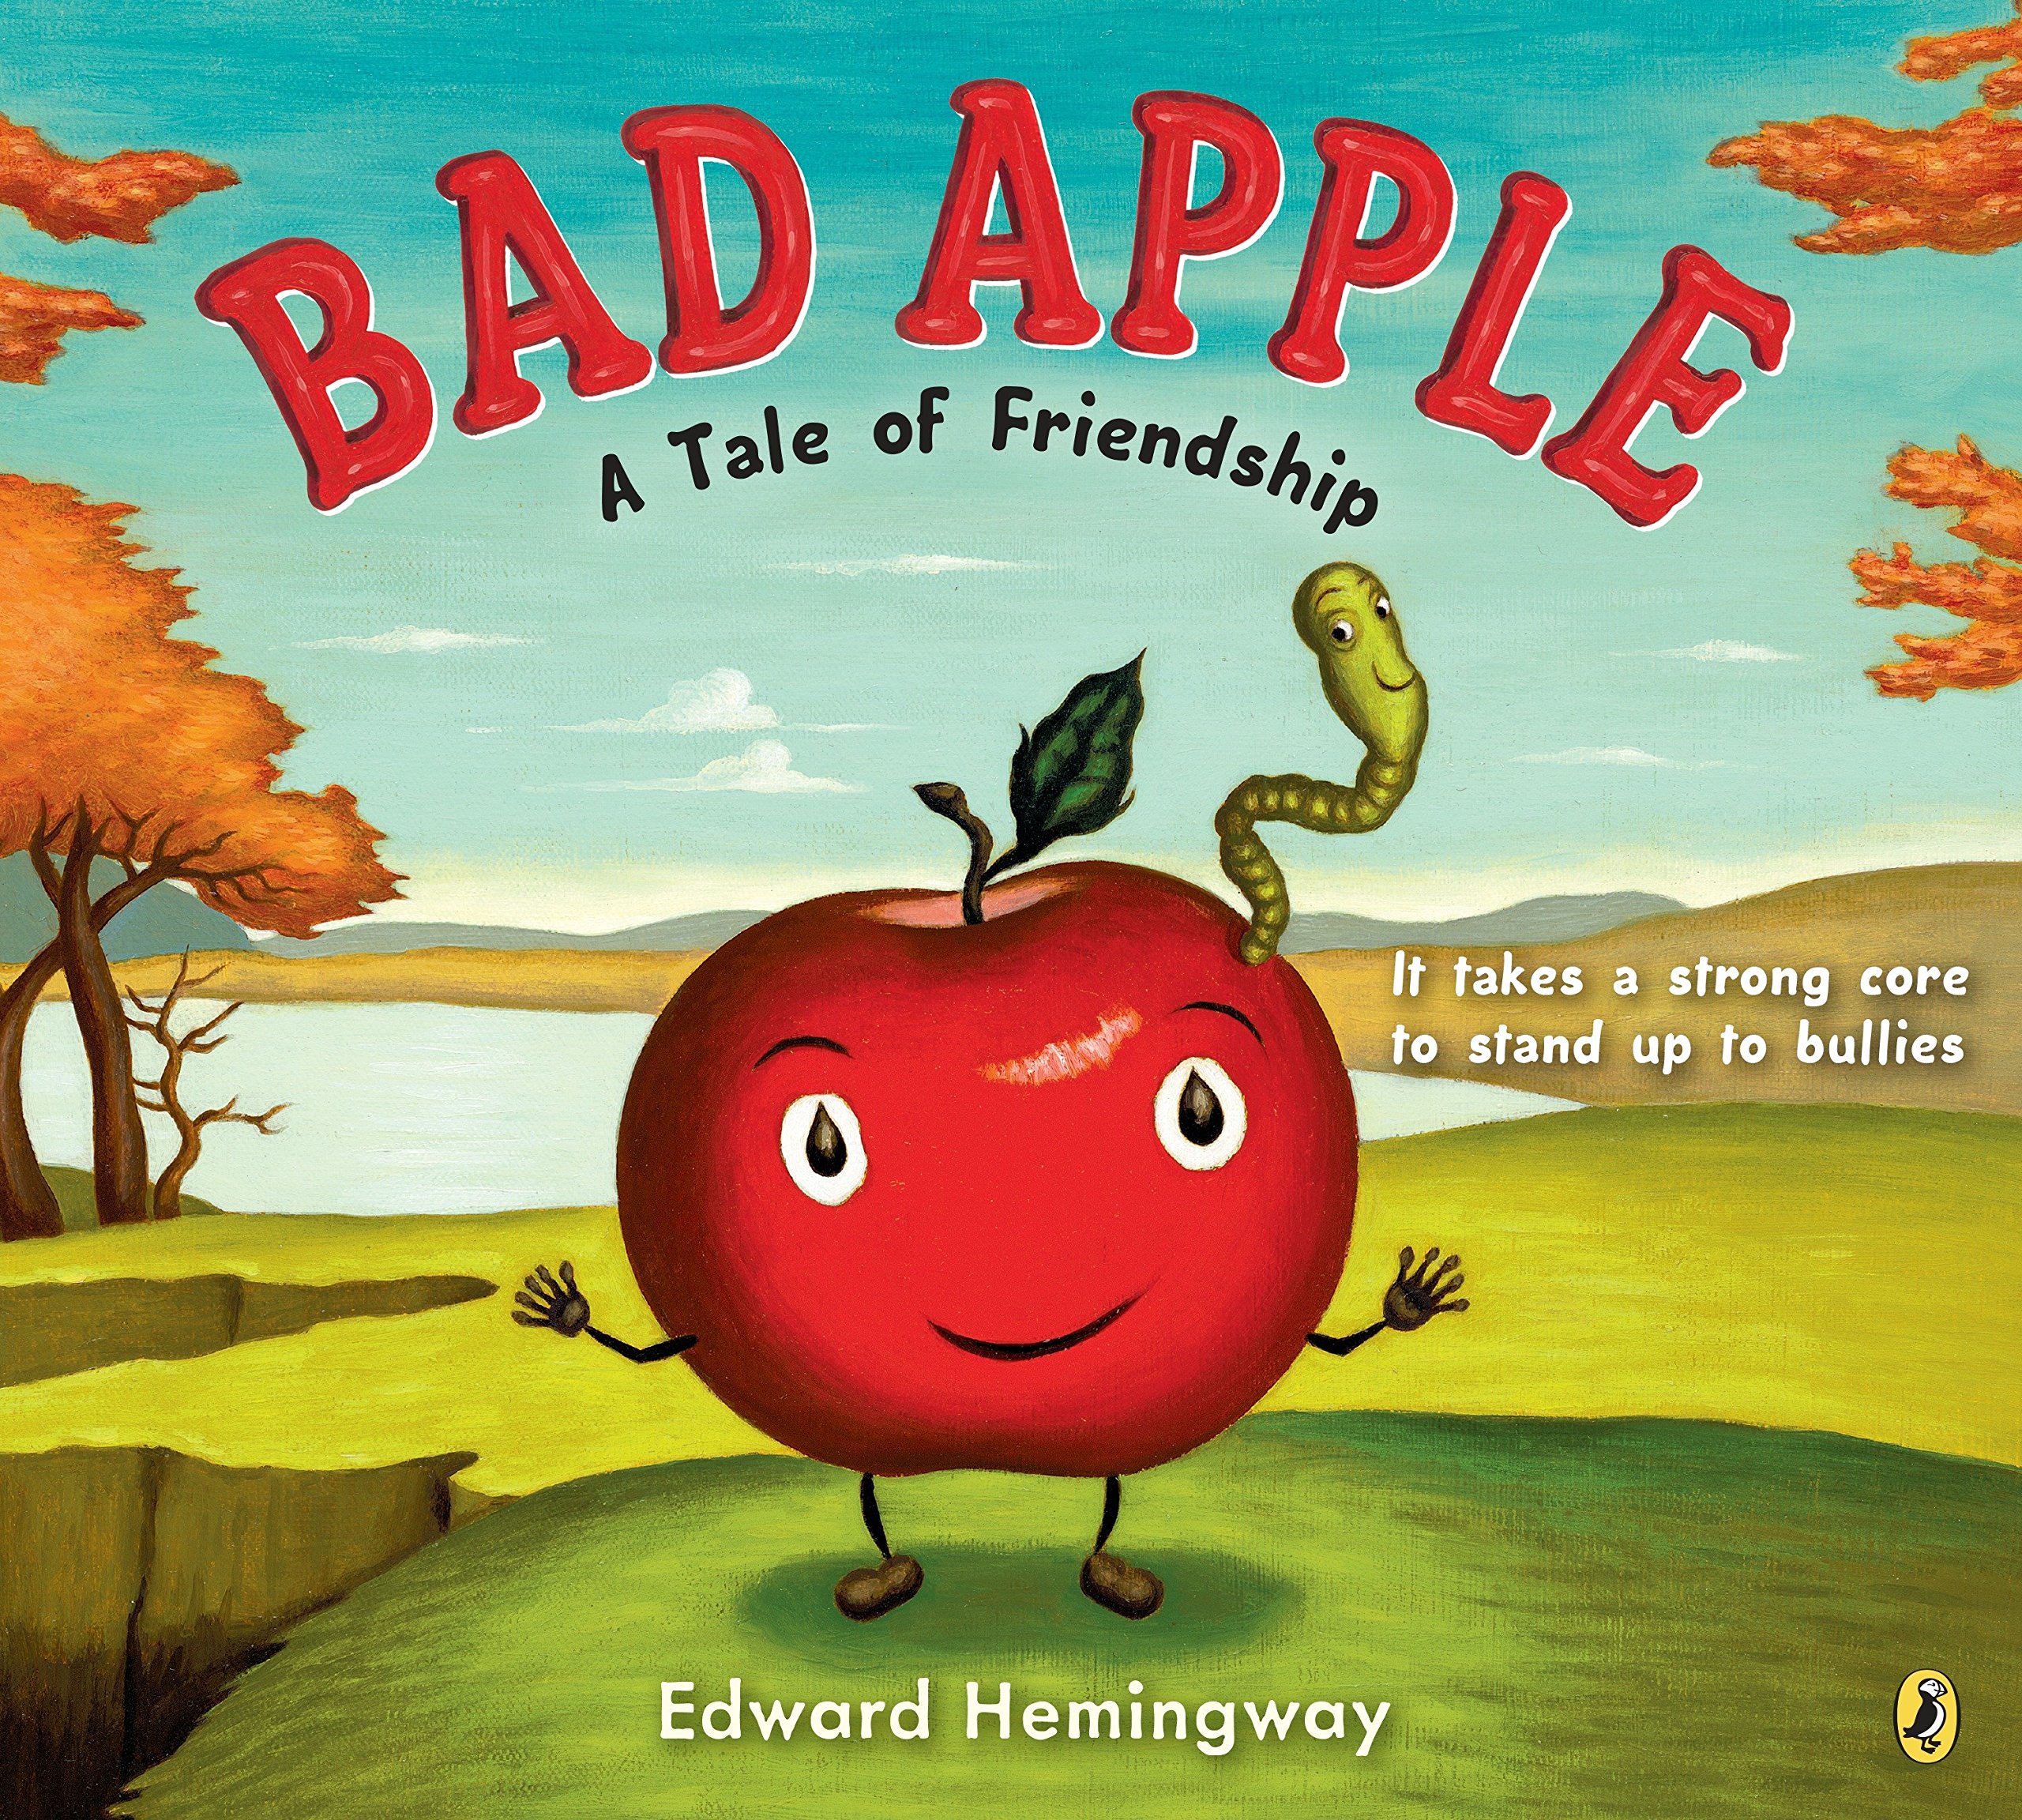 speech and language teaching concepts for Bad Apple: A Tale of Friendship in speech therapy​ ​